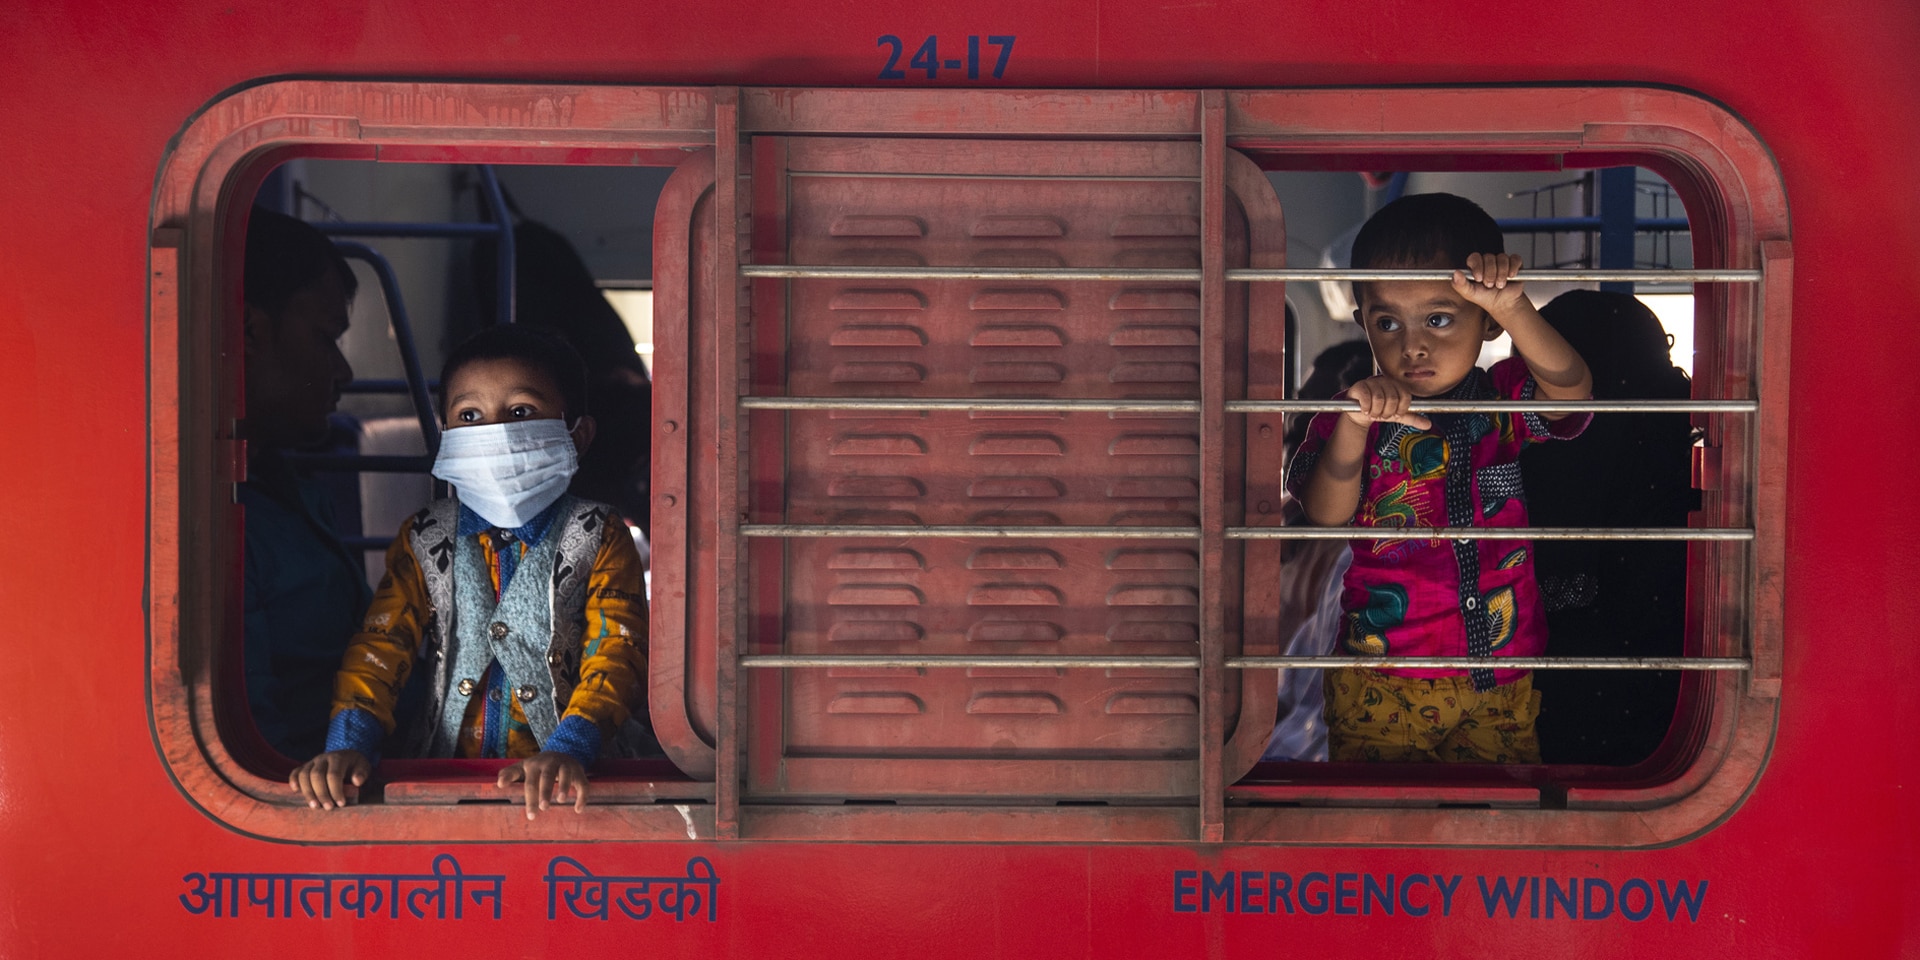 Two children look out of the sliding window of a booth – one with a mask, one without.